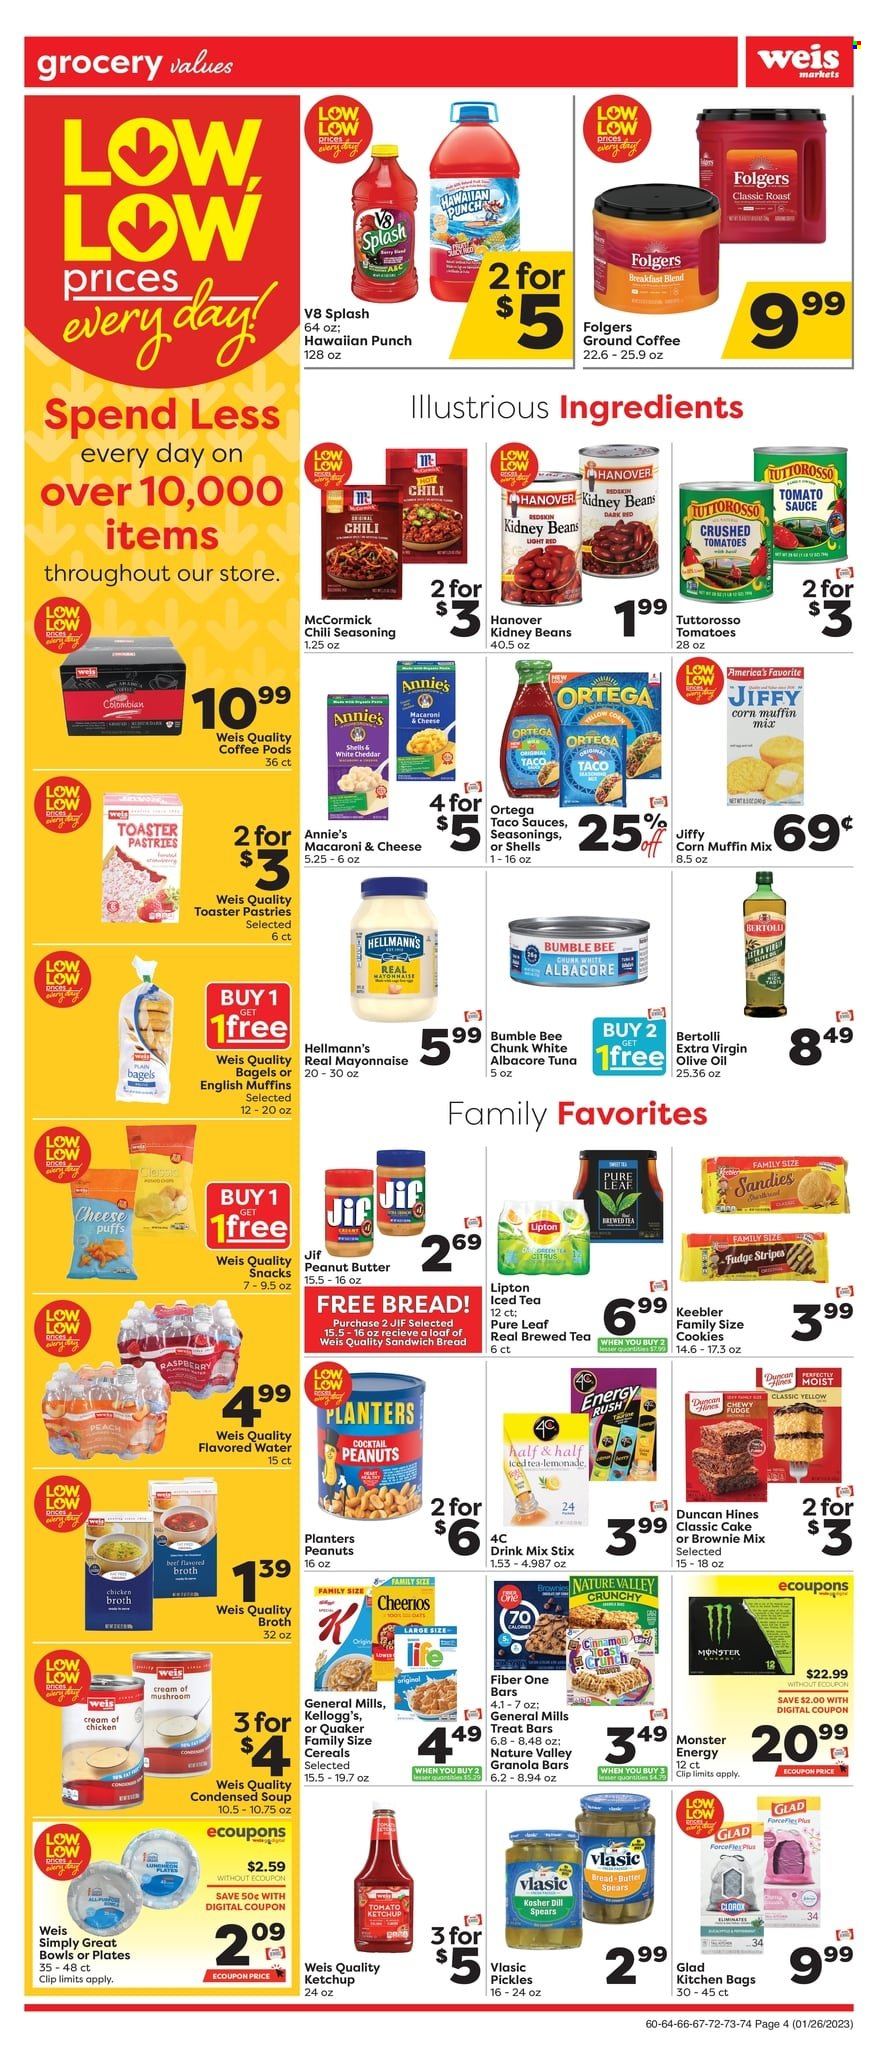 thumbnail - Weis Flyer - 01/26/2023 - 02/01/2023 - Sales products - bagels, english muffins, puffs, brownie mix, muffin mix, corn, tomatoes, tuna, macaroni & cheese, condensed soup, soup, Bumble Bee, Quaker, instant soup, Annie's, Bertolli, mayonnaise, Hellmann’s, cookies, fudge, snack, Kellogg's, Keebler, chicken broth, broth, corn muffin, crushed tomatoes, tomato sauce, kidney beans, pickles, Cheerios, granola bar, Nature Valley, Fiber One, dill, spice, ketchup, extra virgin olive oil, peanut butter, Jif, peanuts, Planters, lemonade, Monster, Lipton, ice tea, Monster Energy, flavored water, Pure Leaf, coffee, coffee pods, Folgers, ground coffee, breakfast blend, Clorox, plate, Jiffy, Half and half. Page 4.